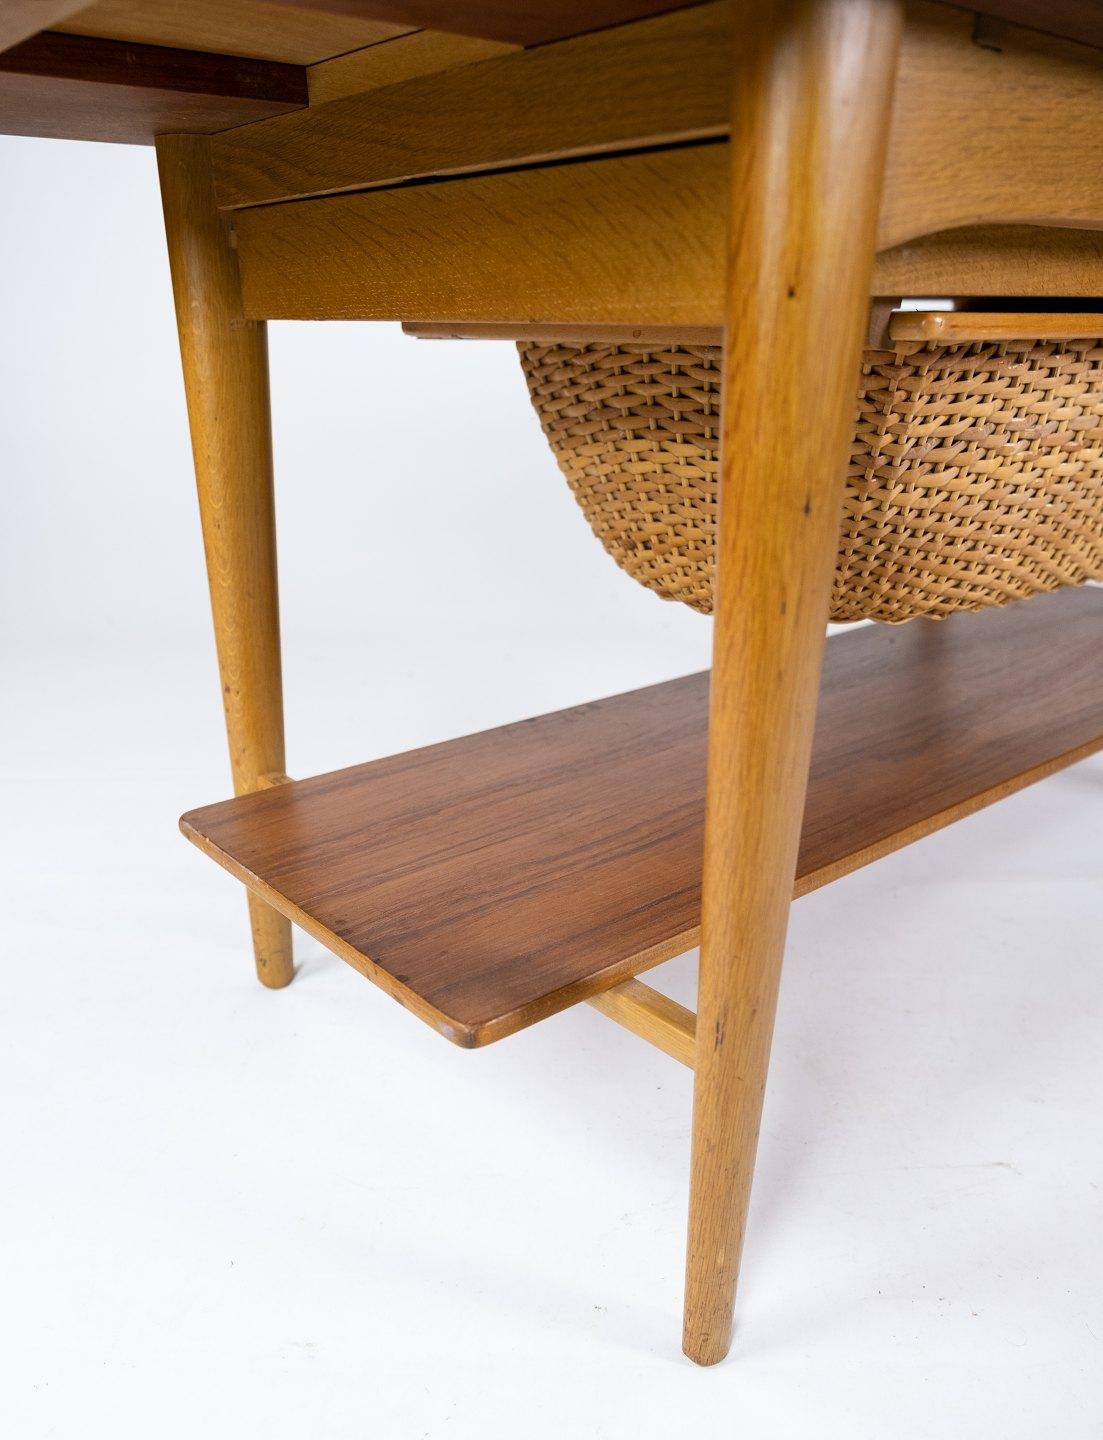 Coffee- and Sewing table in oak and teak of danish design from the 1960s. The table is in great vintage condition.